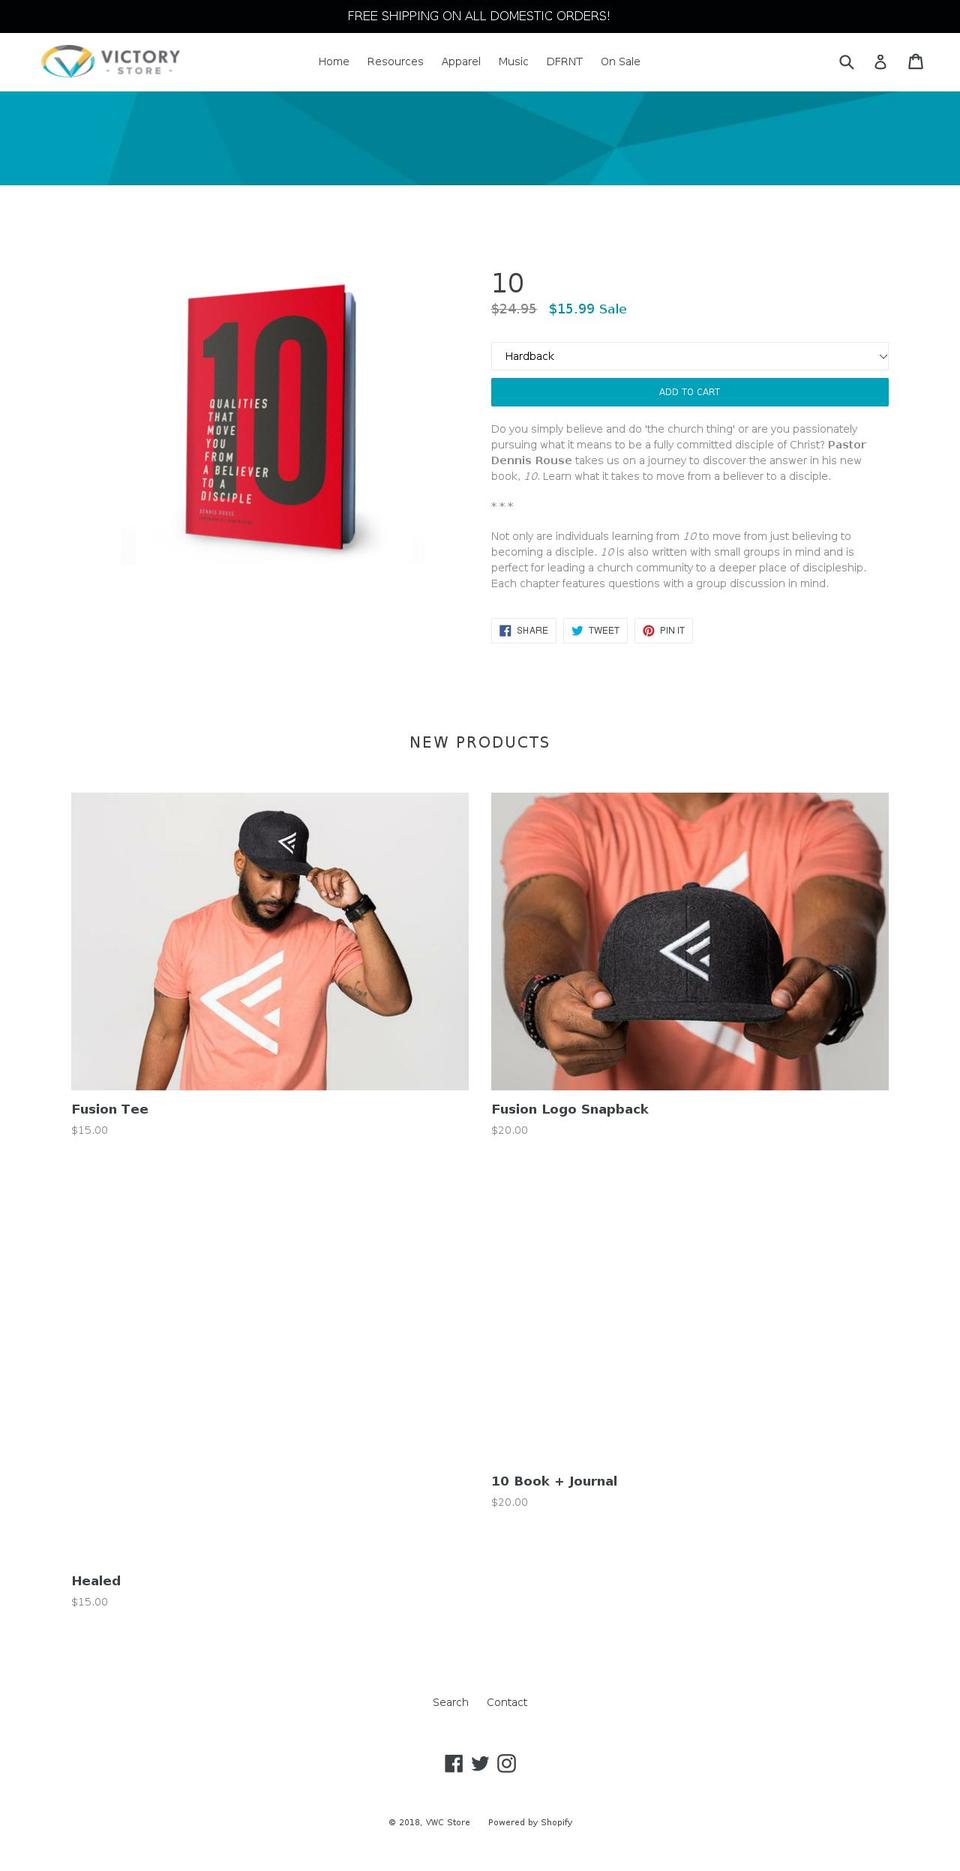 Highlight Shopify theme site example vwcstore.com